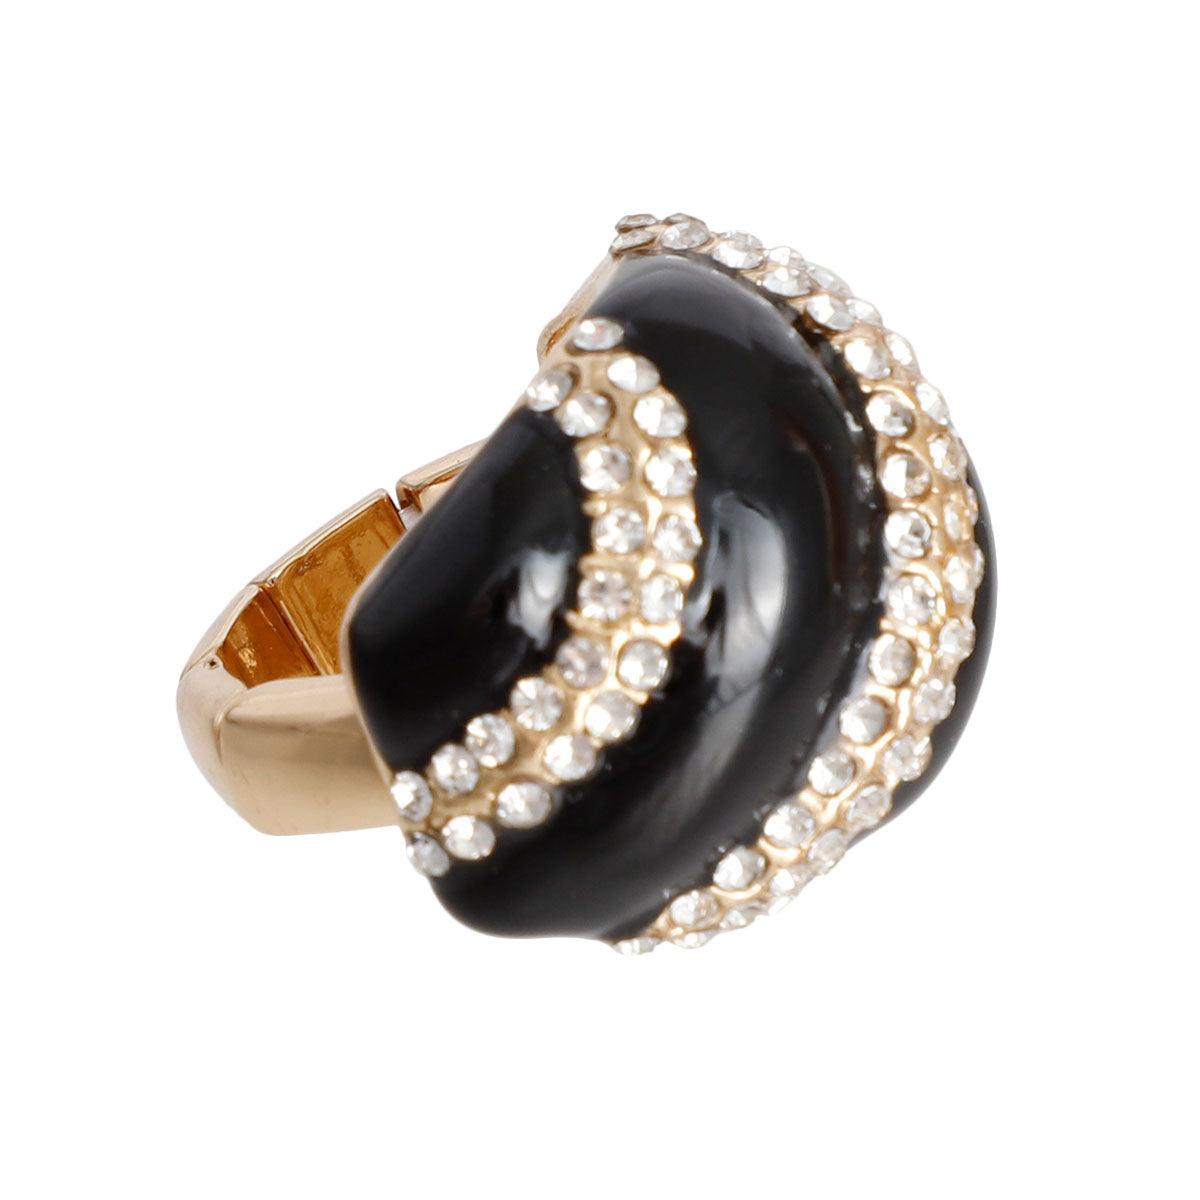 Elegant Gold Cocktail Ring with Clear Rhinestone and Black Dome - Fashion Jewelry